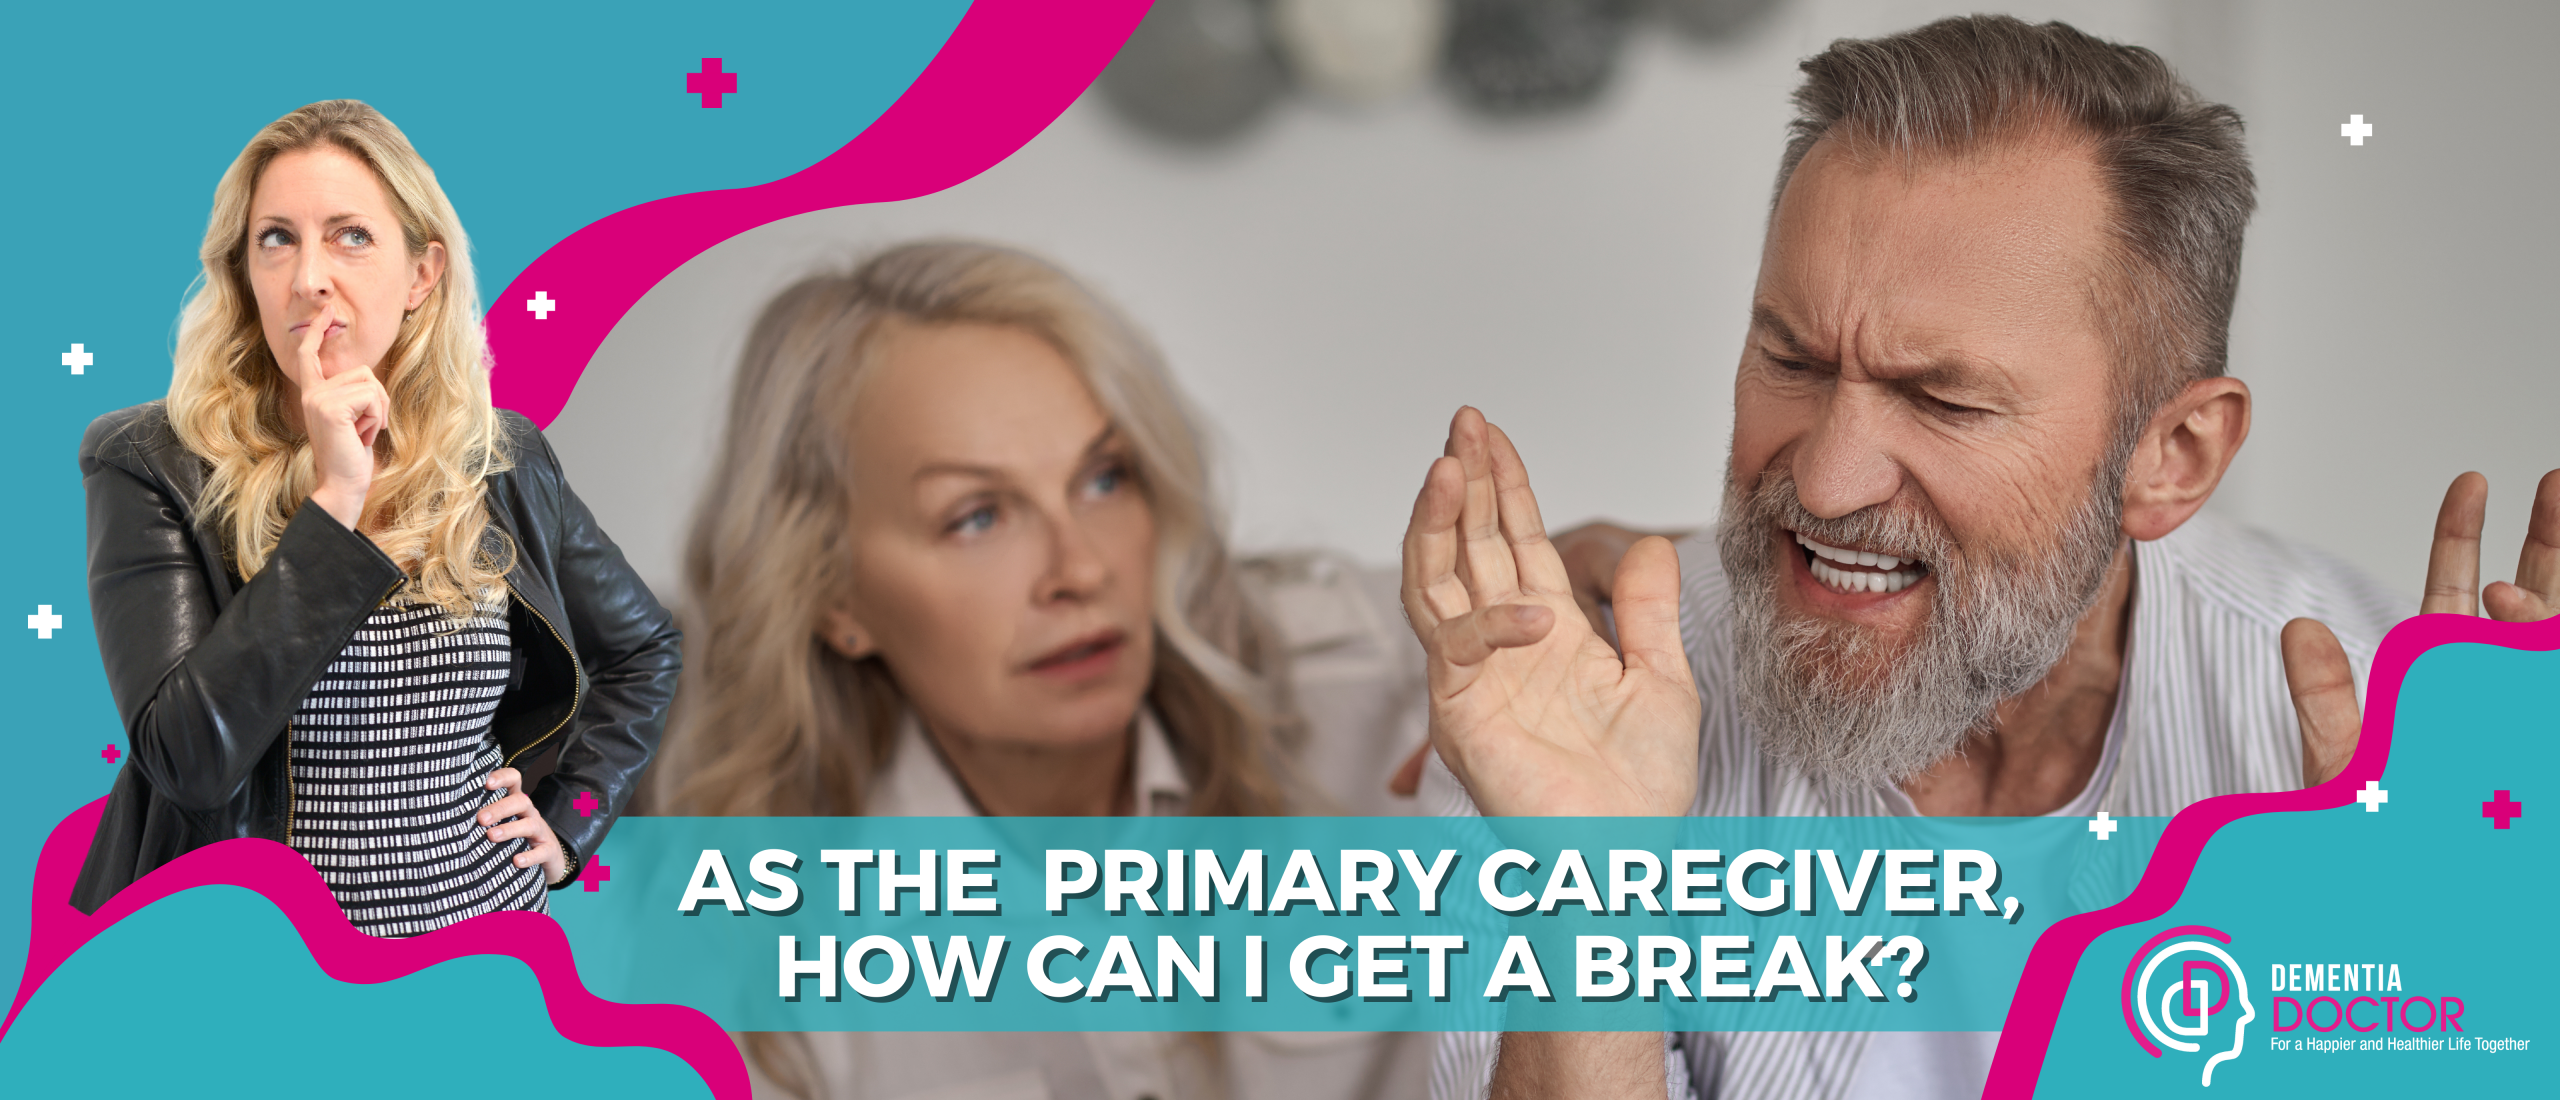 As the primary caregiver for a dementia patient, how can I get a break?